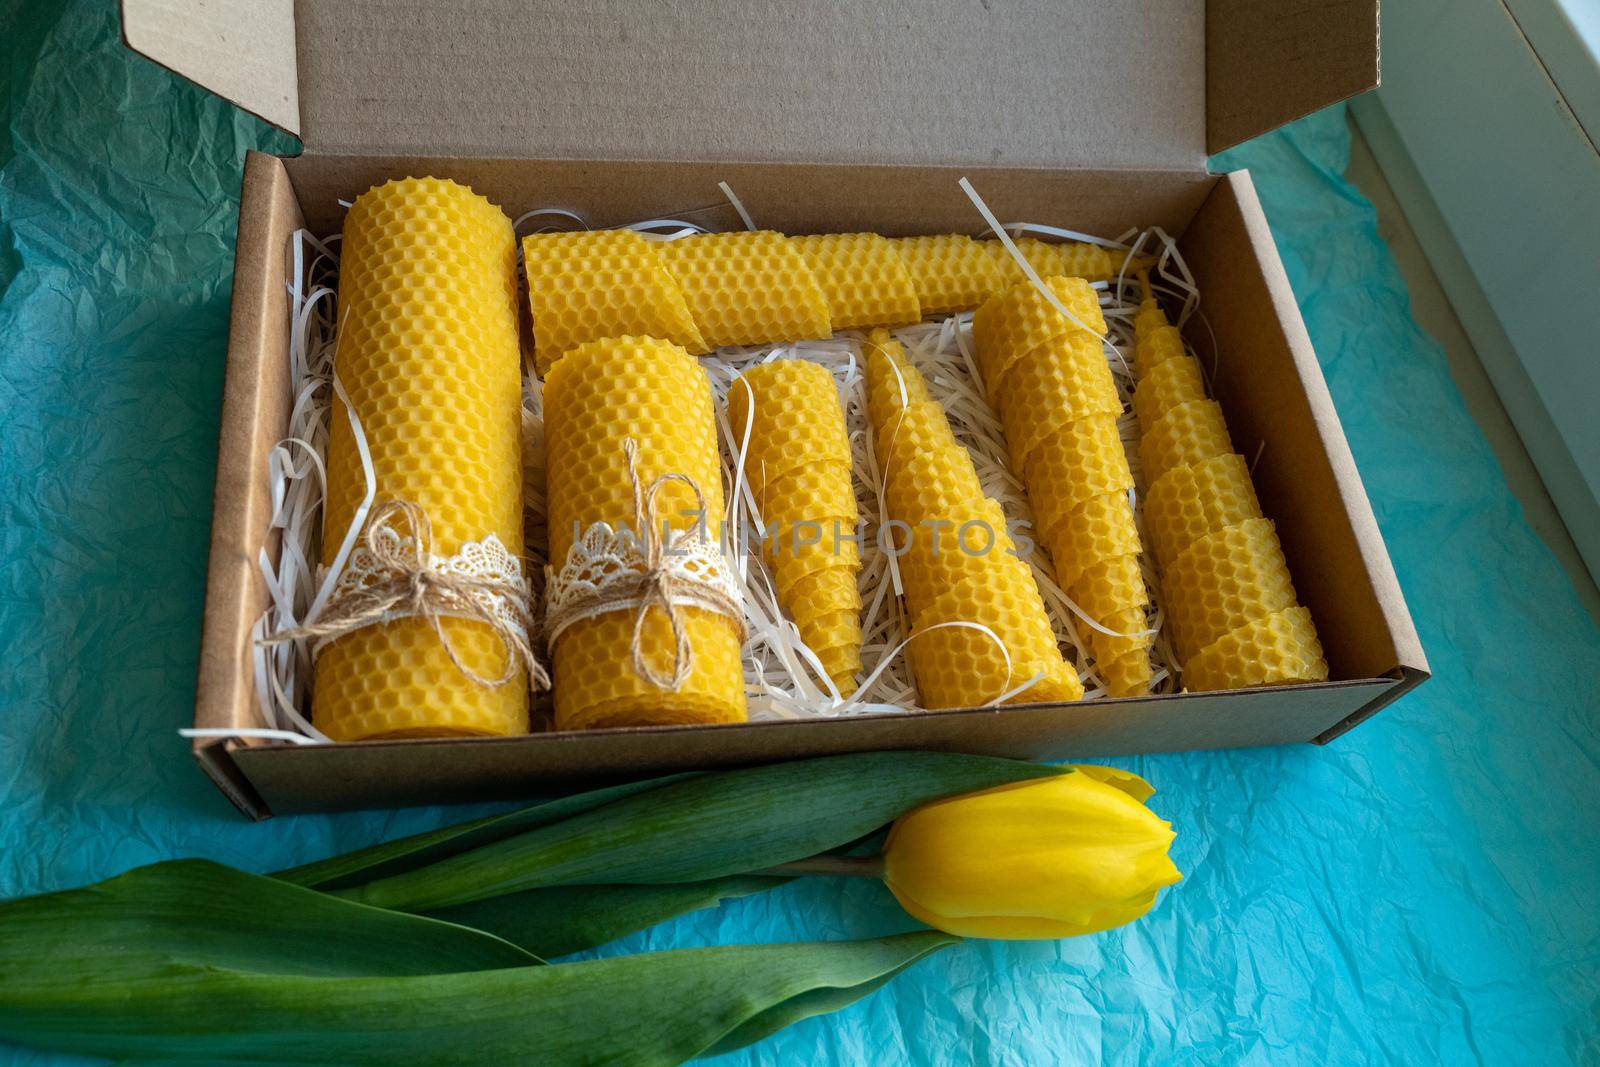 Seven beeswax candles in a box. The candles are decorated with lace and tied with a jute rope